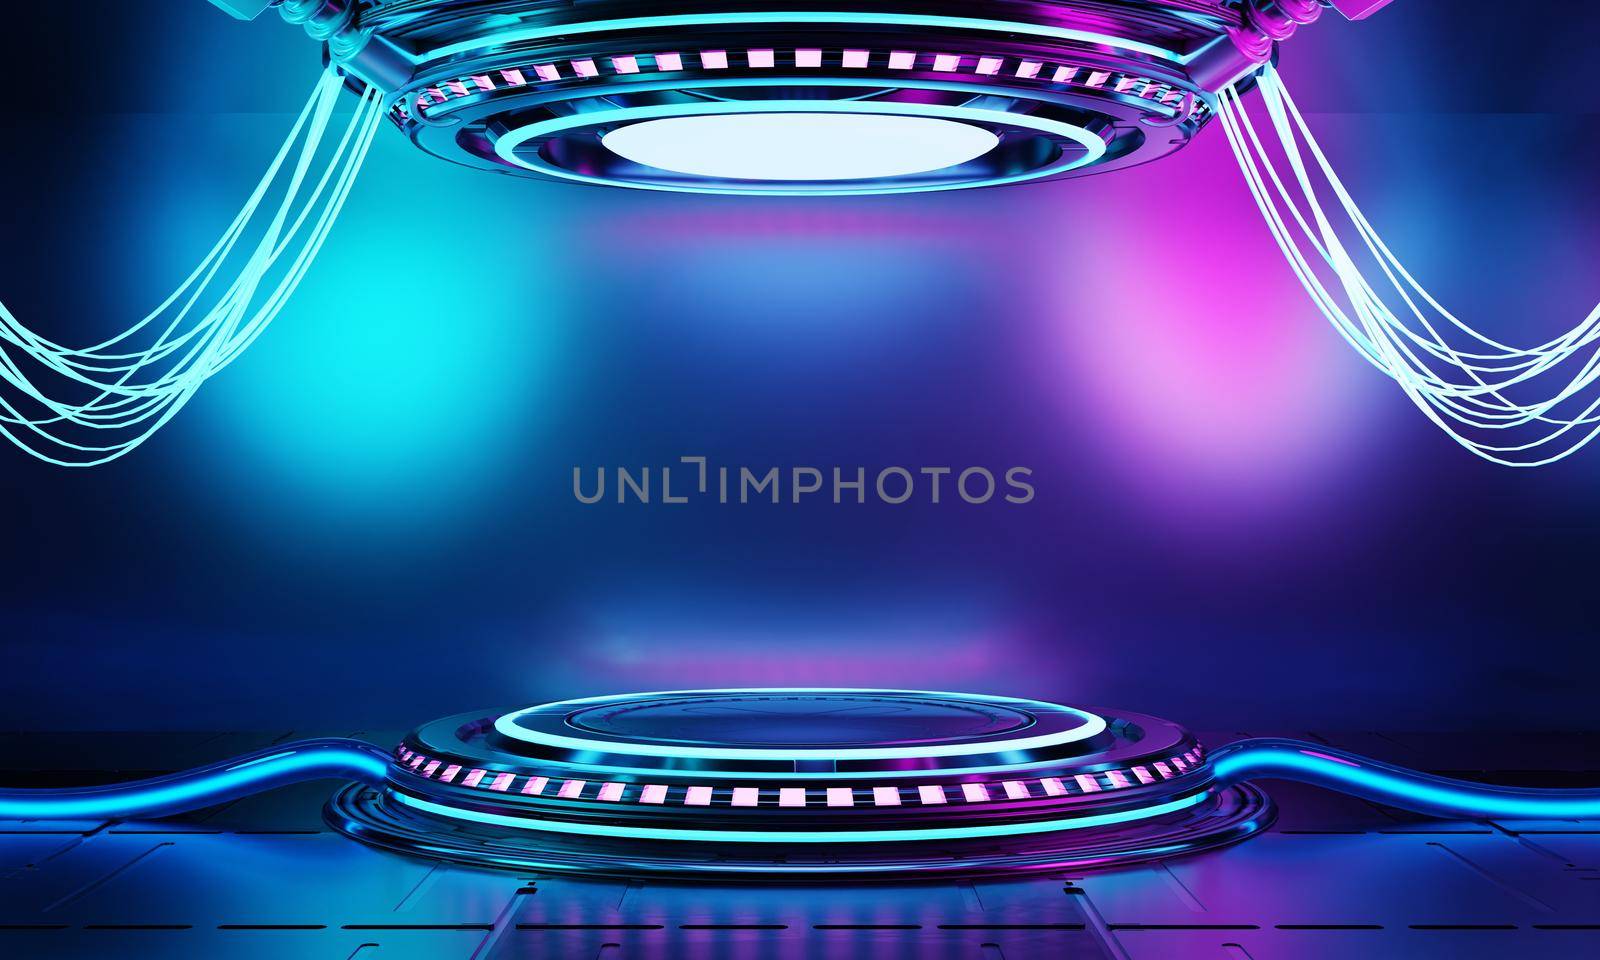 Inside spaceship laboratory with empty podium interior architecture with glowing blue and pink neon for cyberpunk product presentation. Technology and Sci-fi concept. 3D illustration rendering by MiniStocker